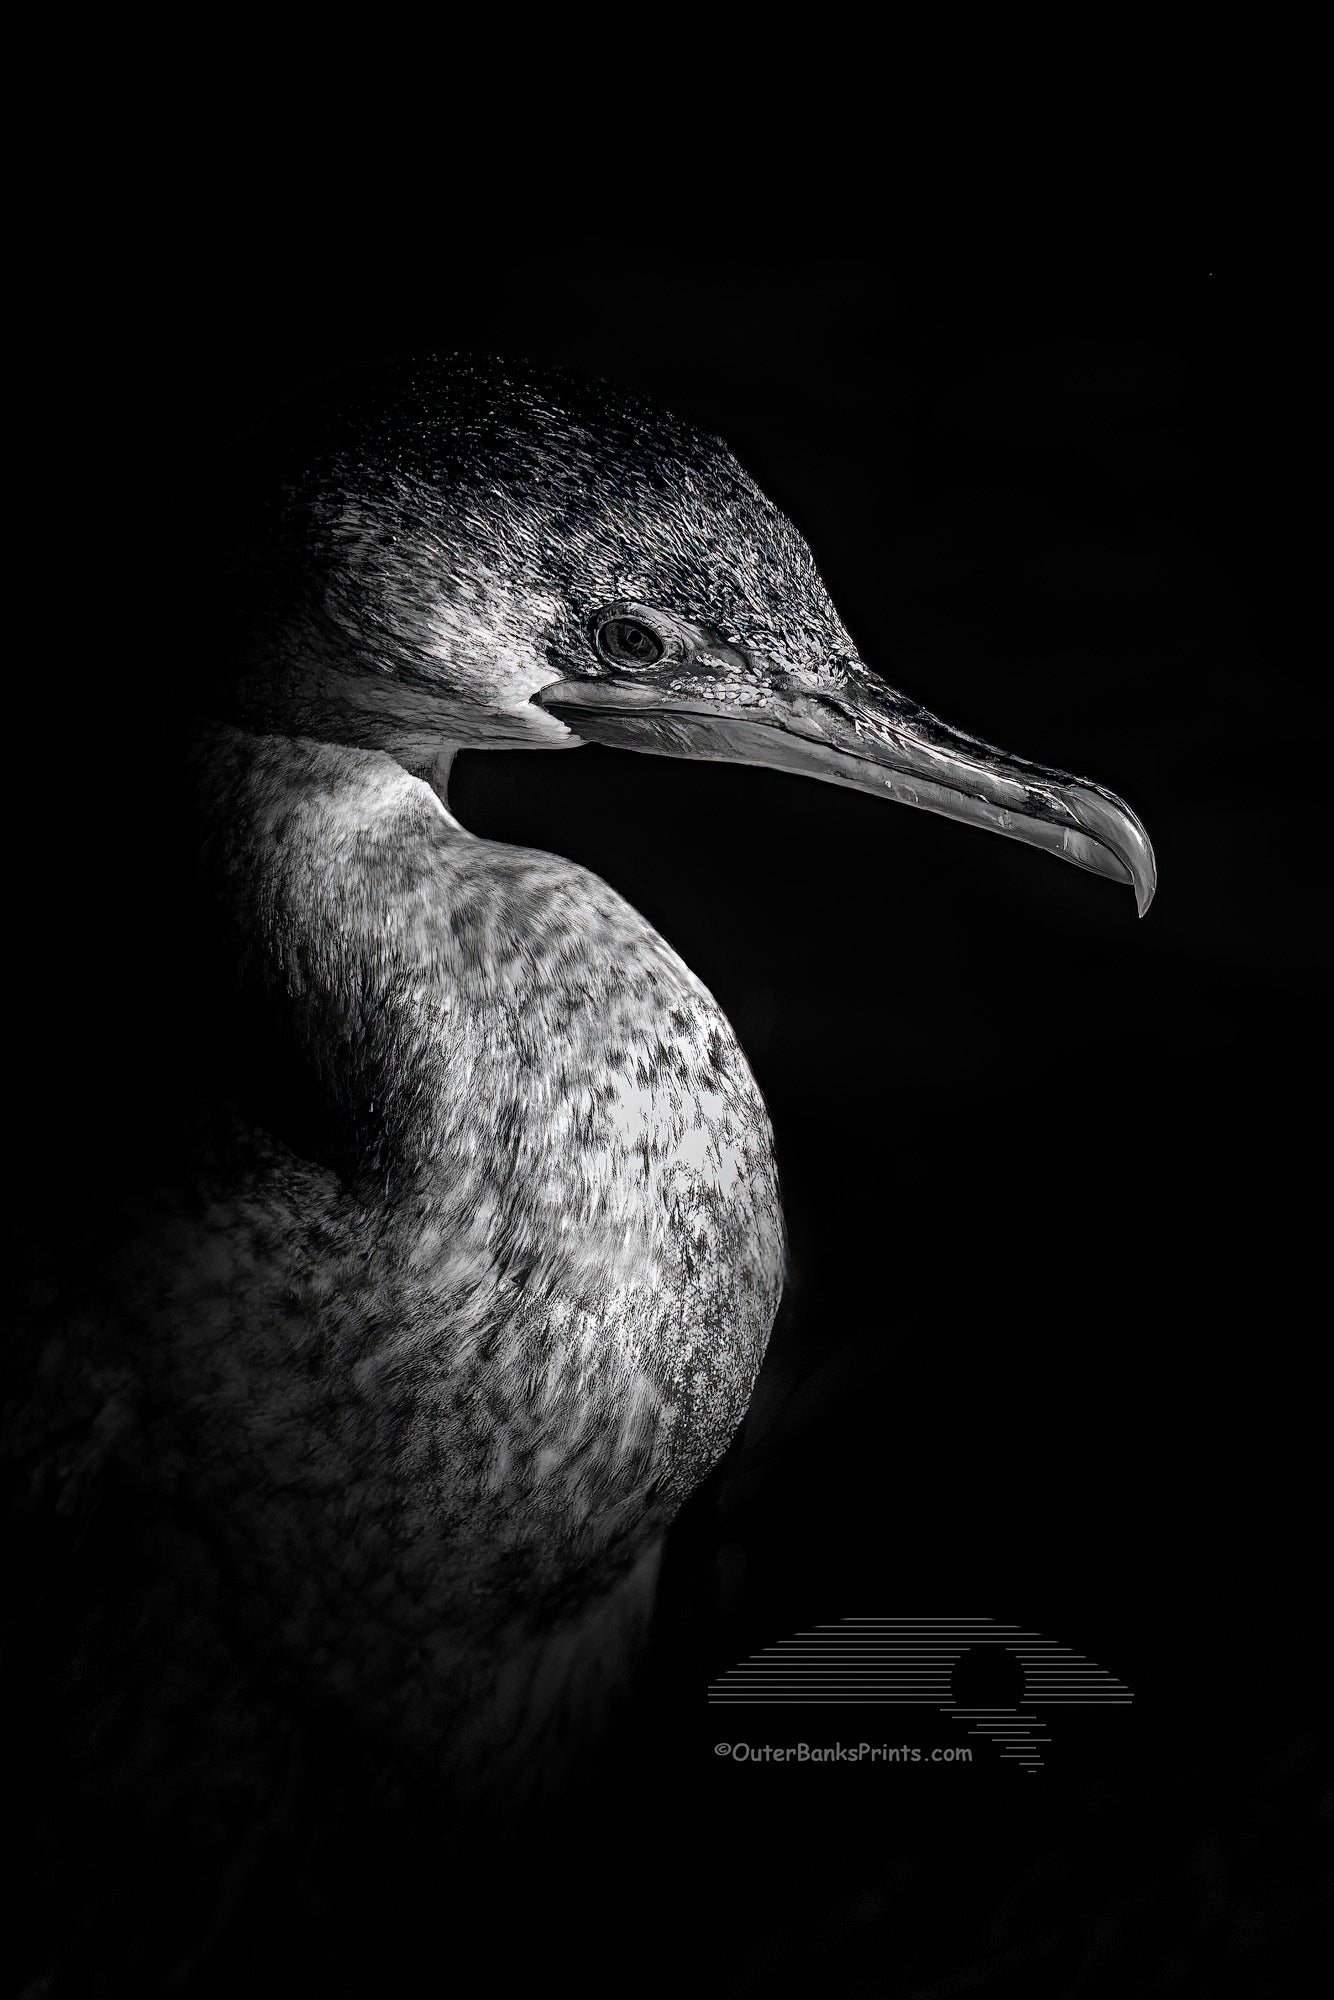 Black and white close-up of a cormorant coming out of deep shadows into the light.